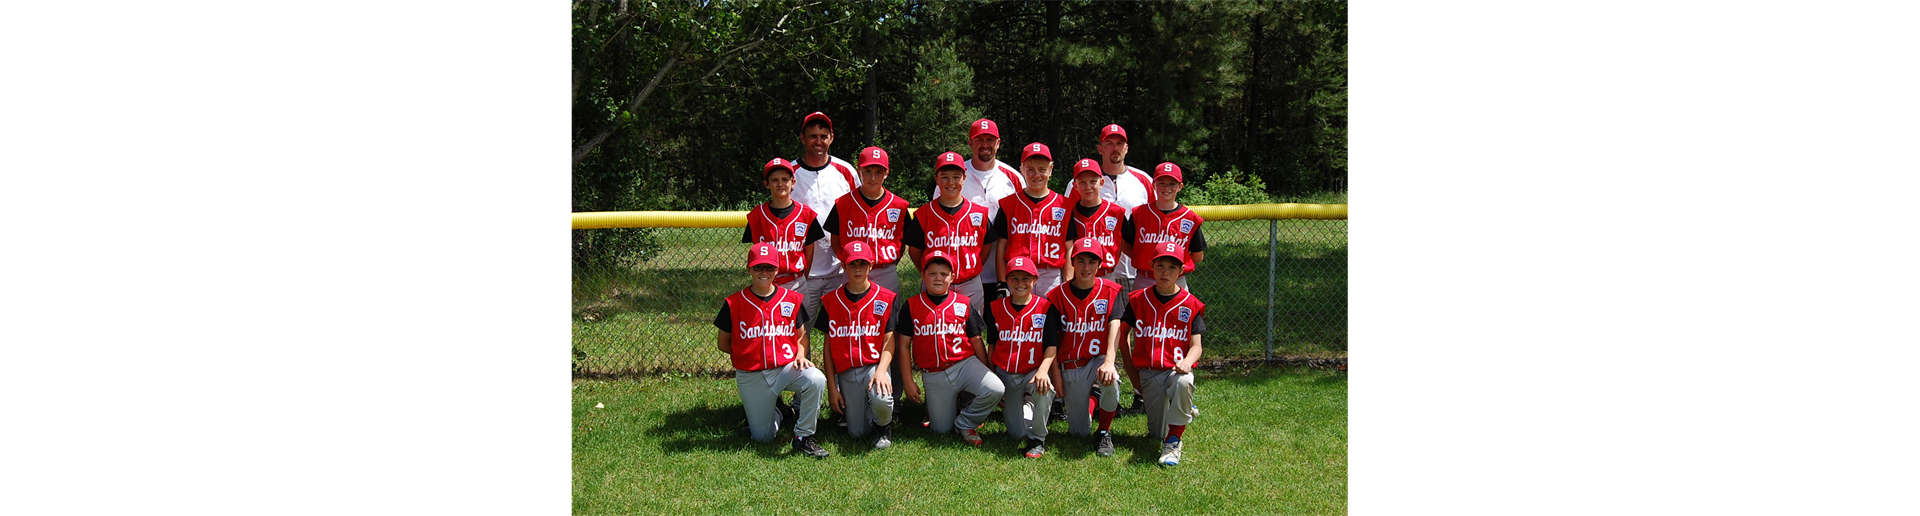 A look back: the 2014 12U All-Star team